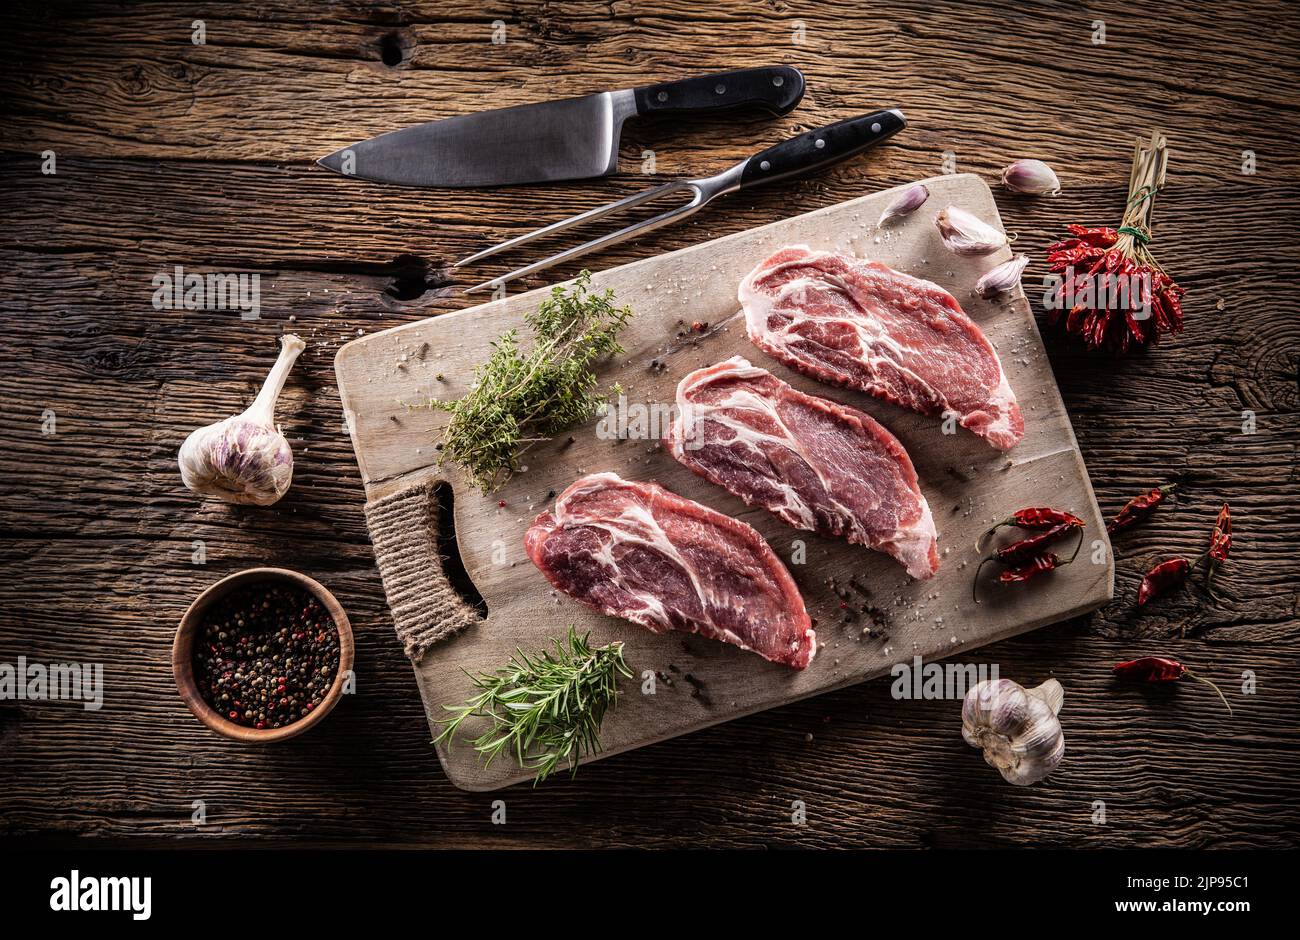 Three sliced pieces of pork neck with herbs, chili spices and garlic on a cutting board. Stock Photo